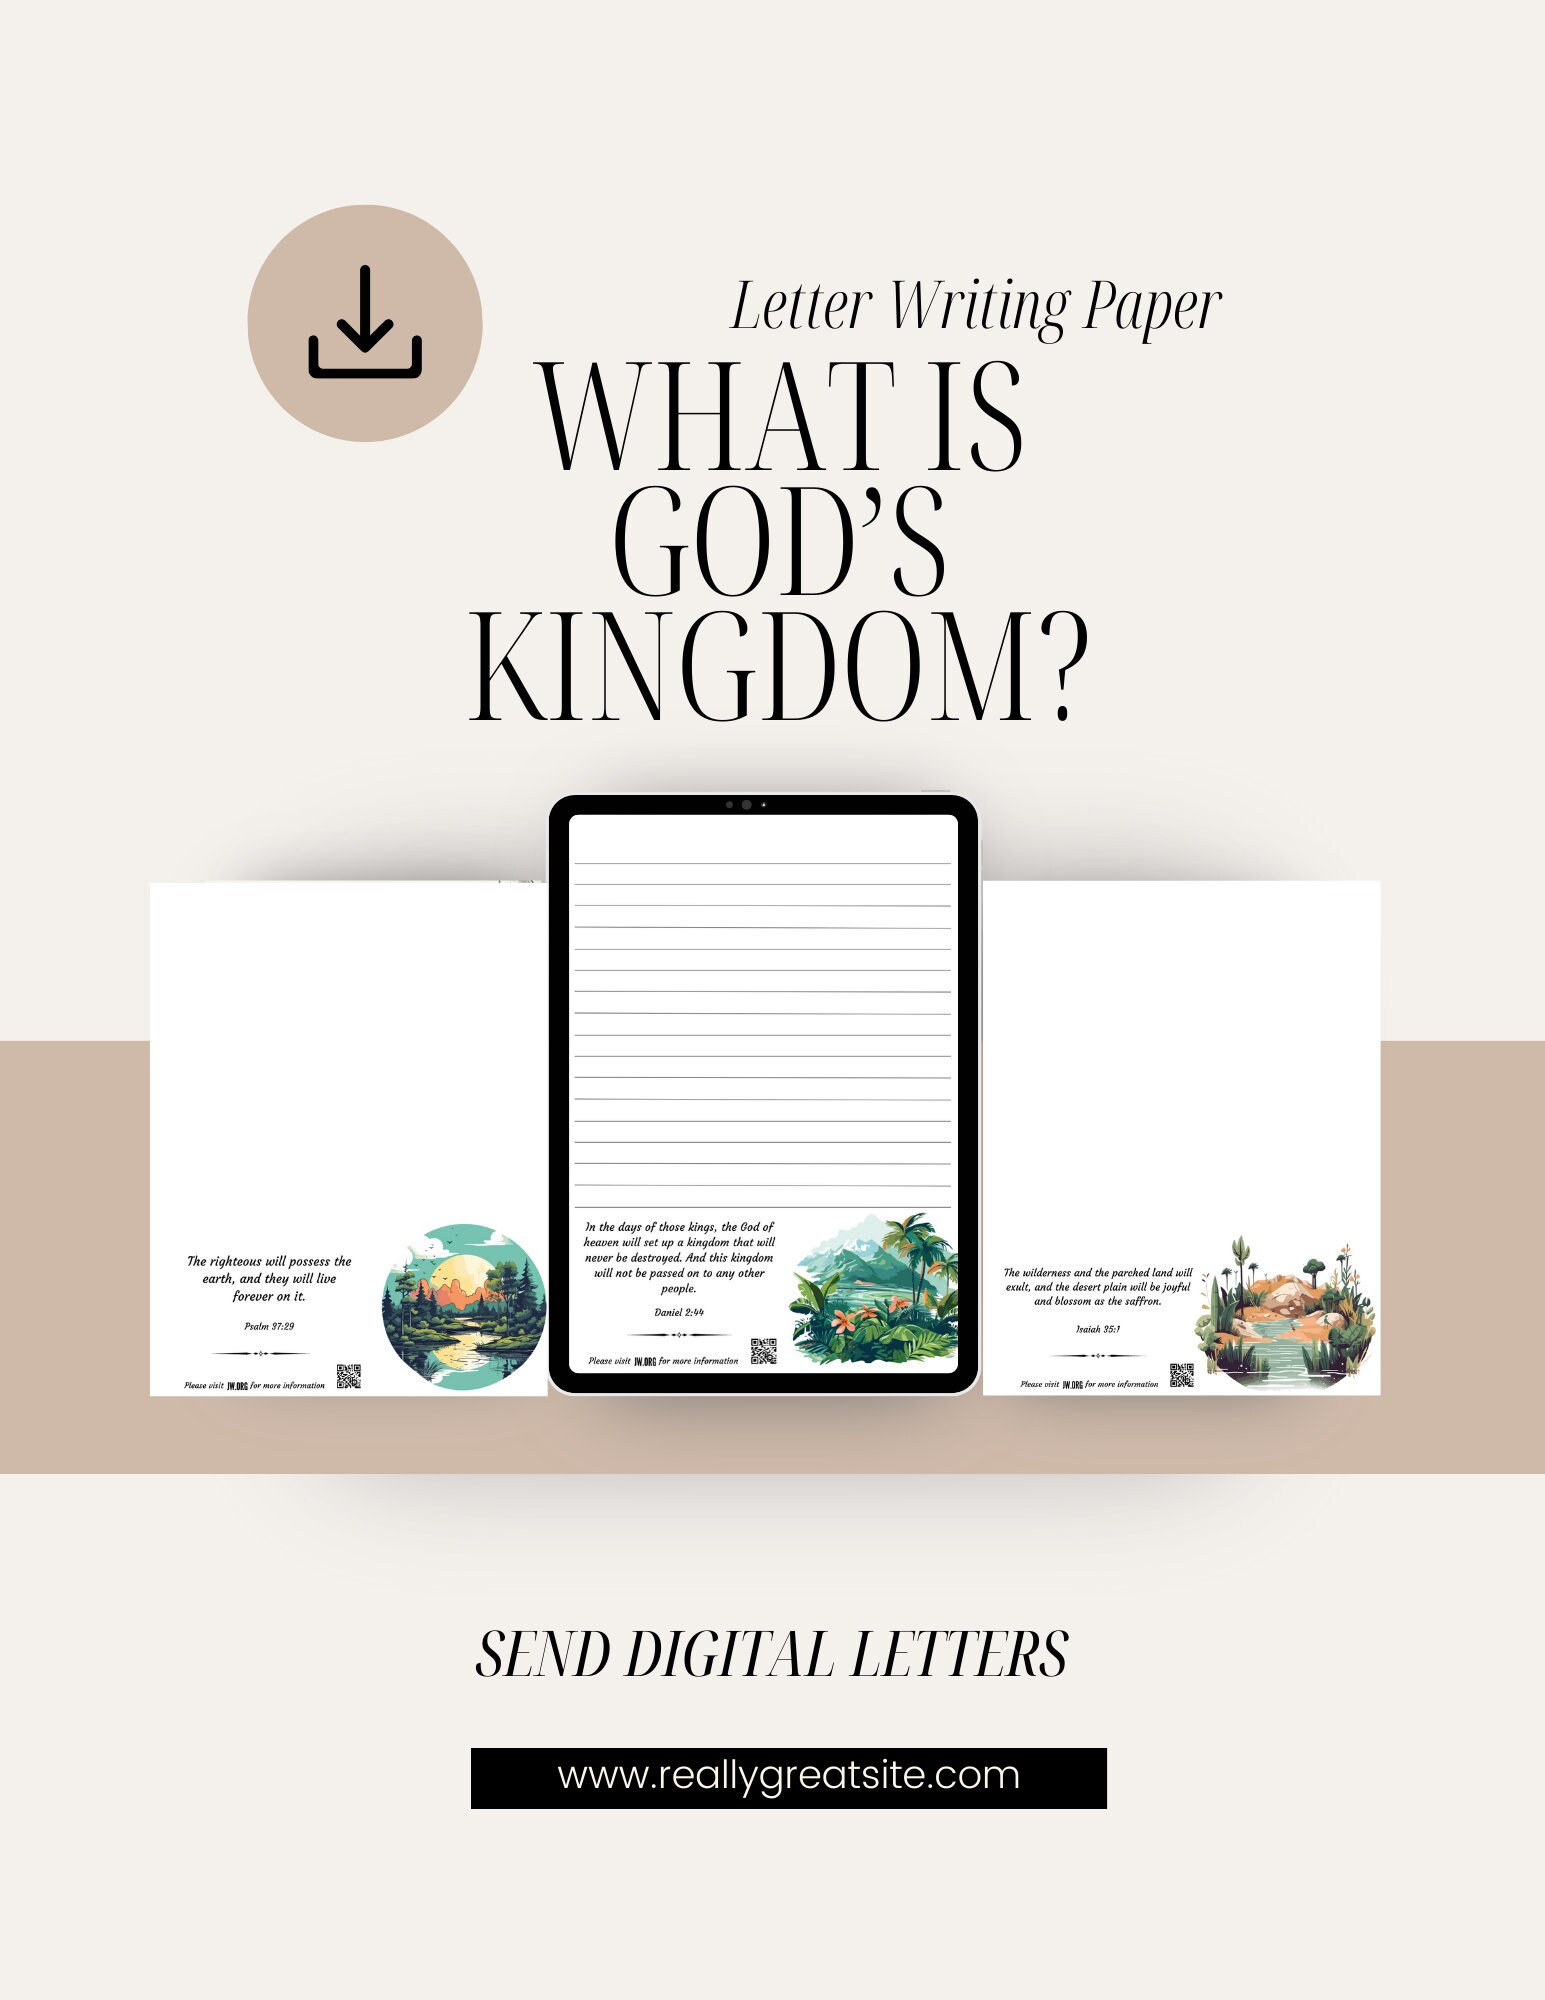 JW Letter Writing Pages – Variety Pack – English & Spanish